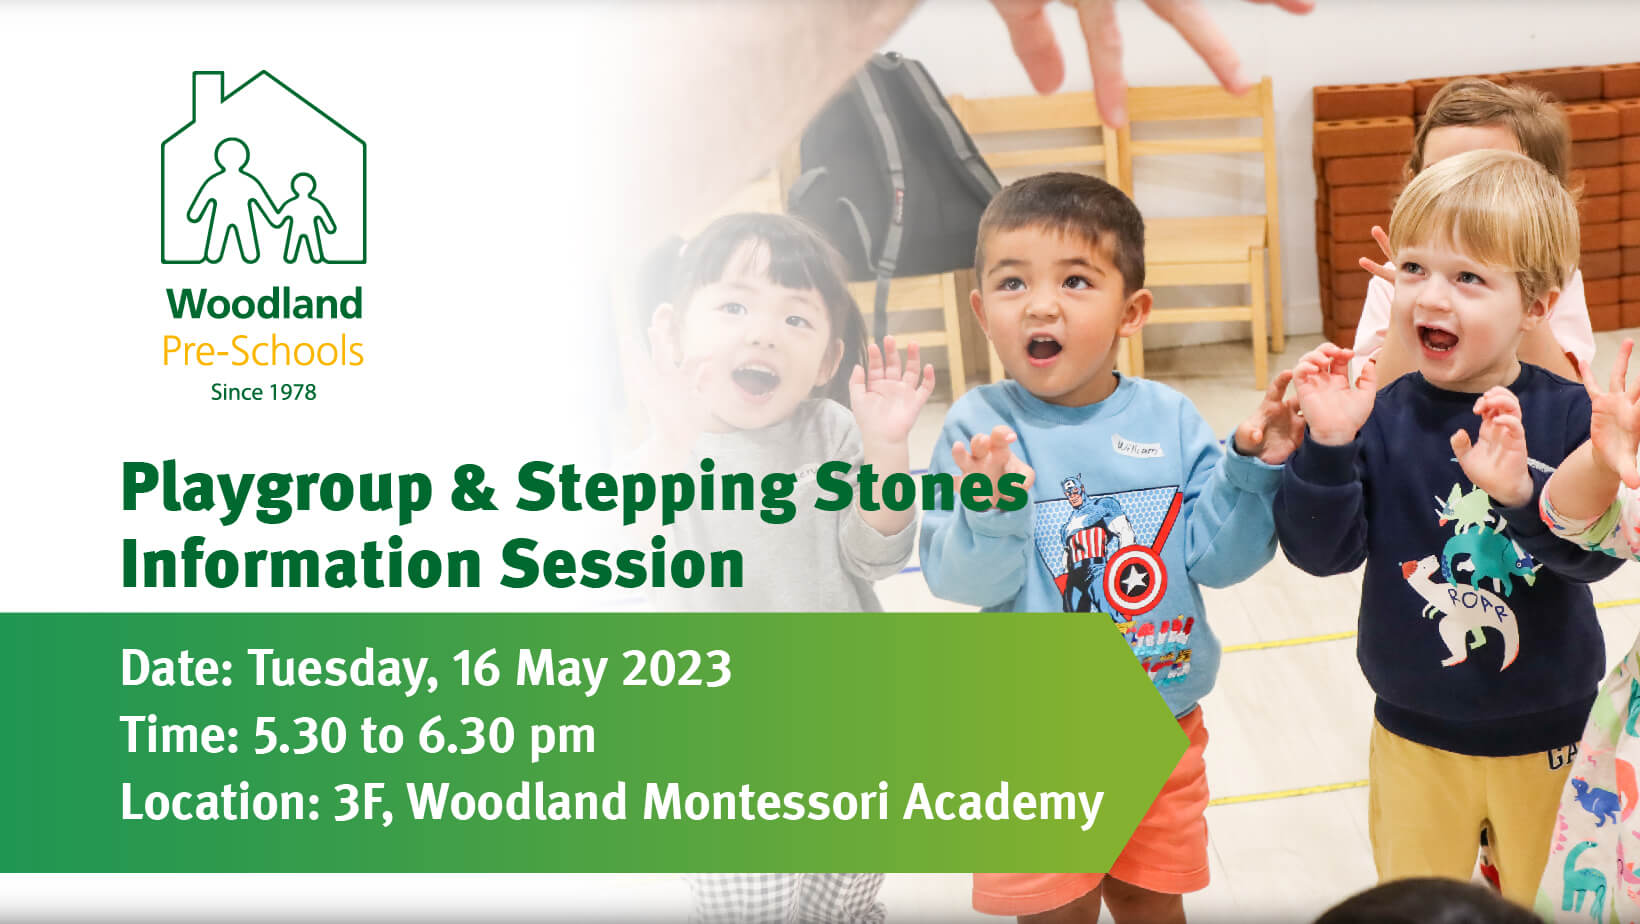 Register for our upcoming info sessions at Woodland Mid-Levels